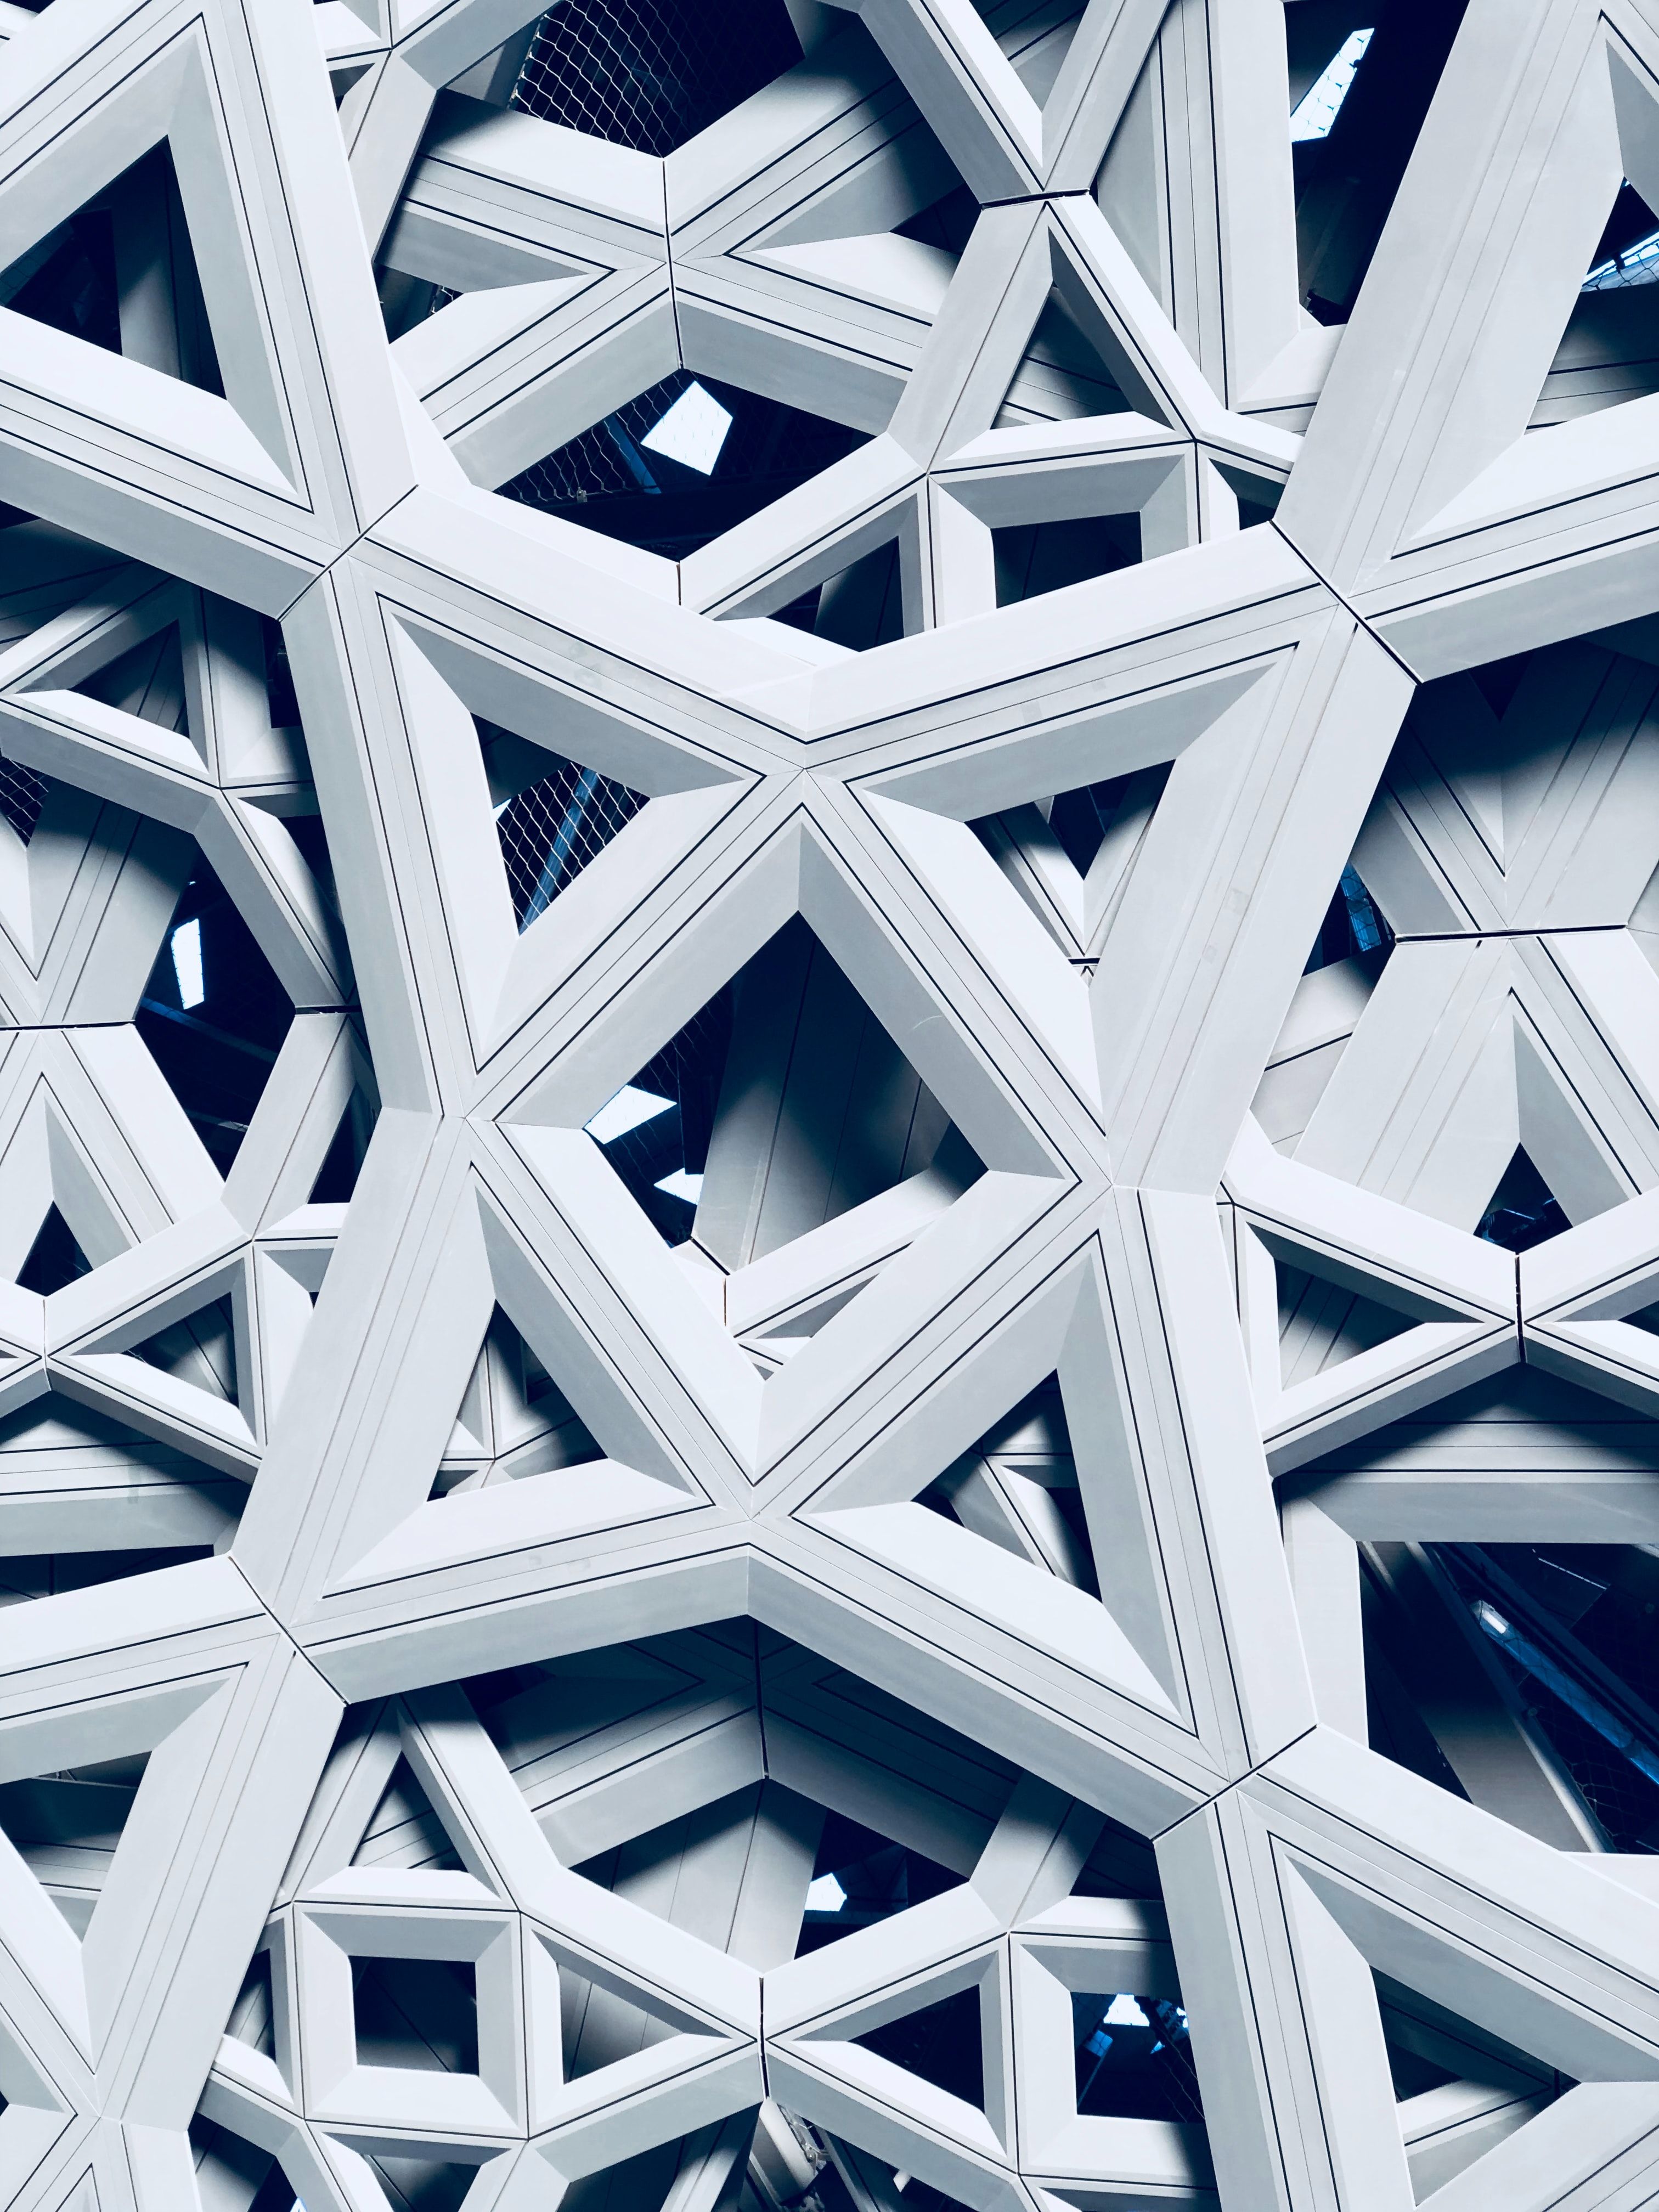 Geometric Architecture Picture. Download Free Image